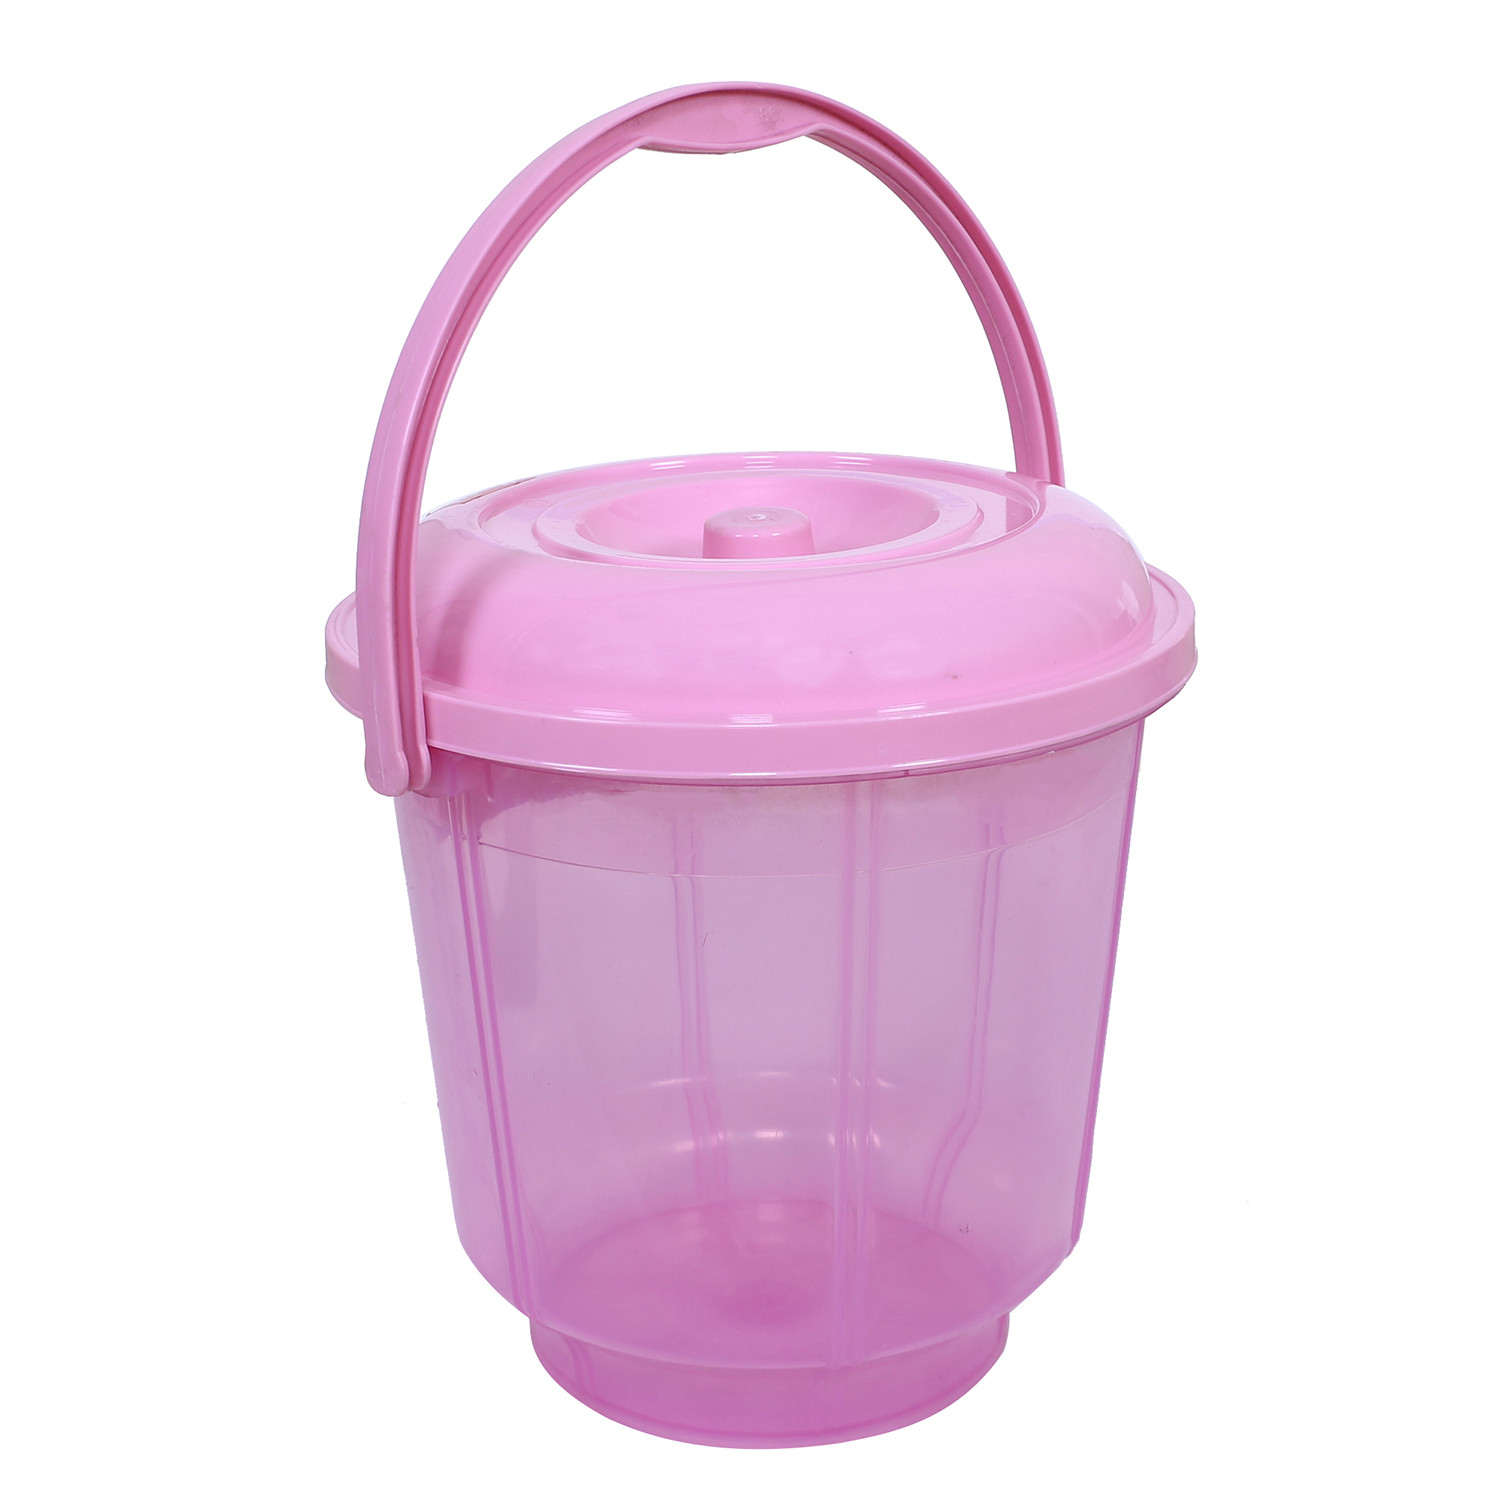 Kuber Industries Colorful Homeware Bucket|Unbreakable Plastic Bucket|Transparent Bucket with Lid & Handle for Bathroom,Home Use,13 Litre,Pack of 2 (Pink & Brown)